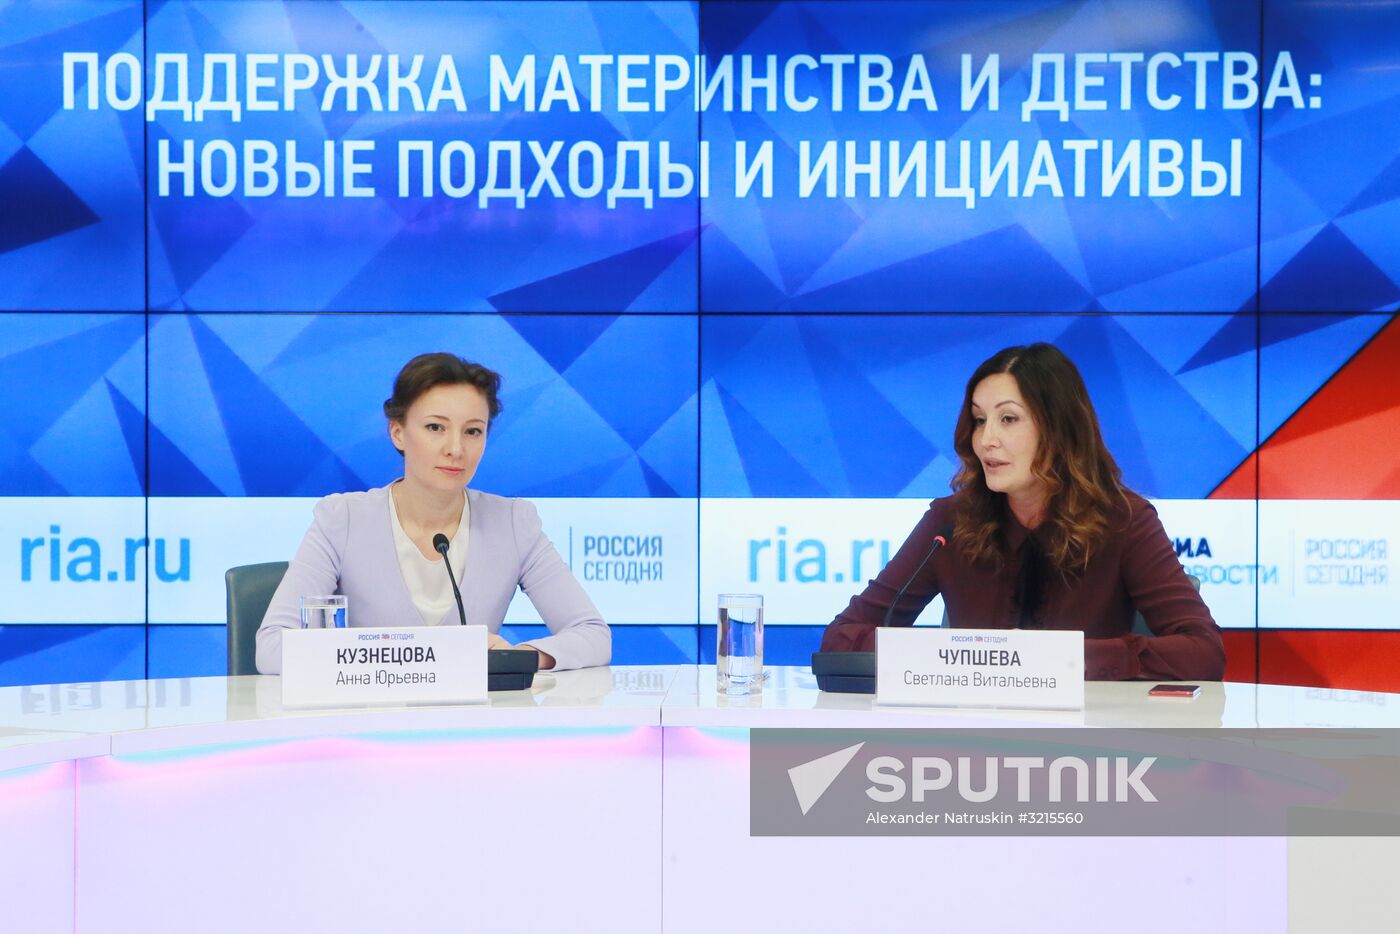 News conference "New approaches and initiatives in motherhood and childhood support"